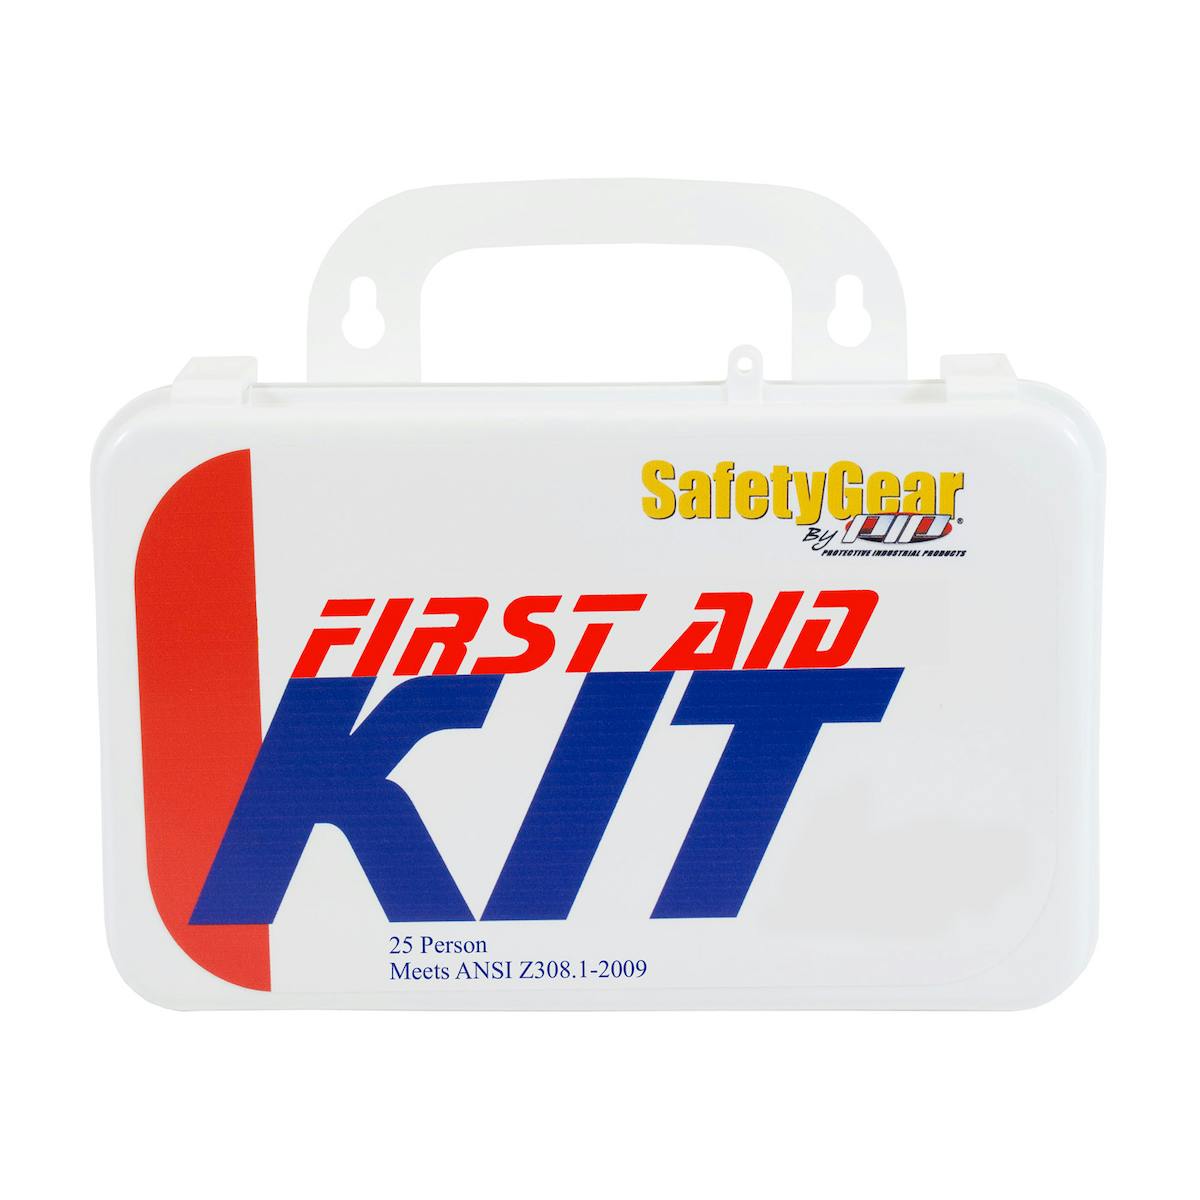 Personal First Aid Kit - 25 Person, White (299-13225) - KIT_0